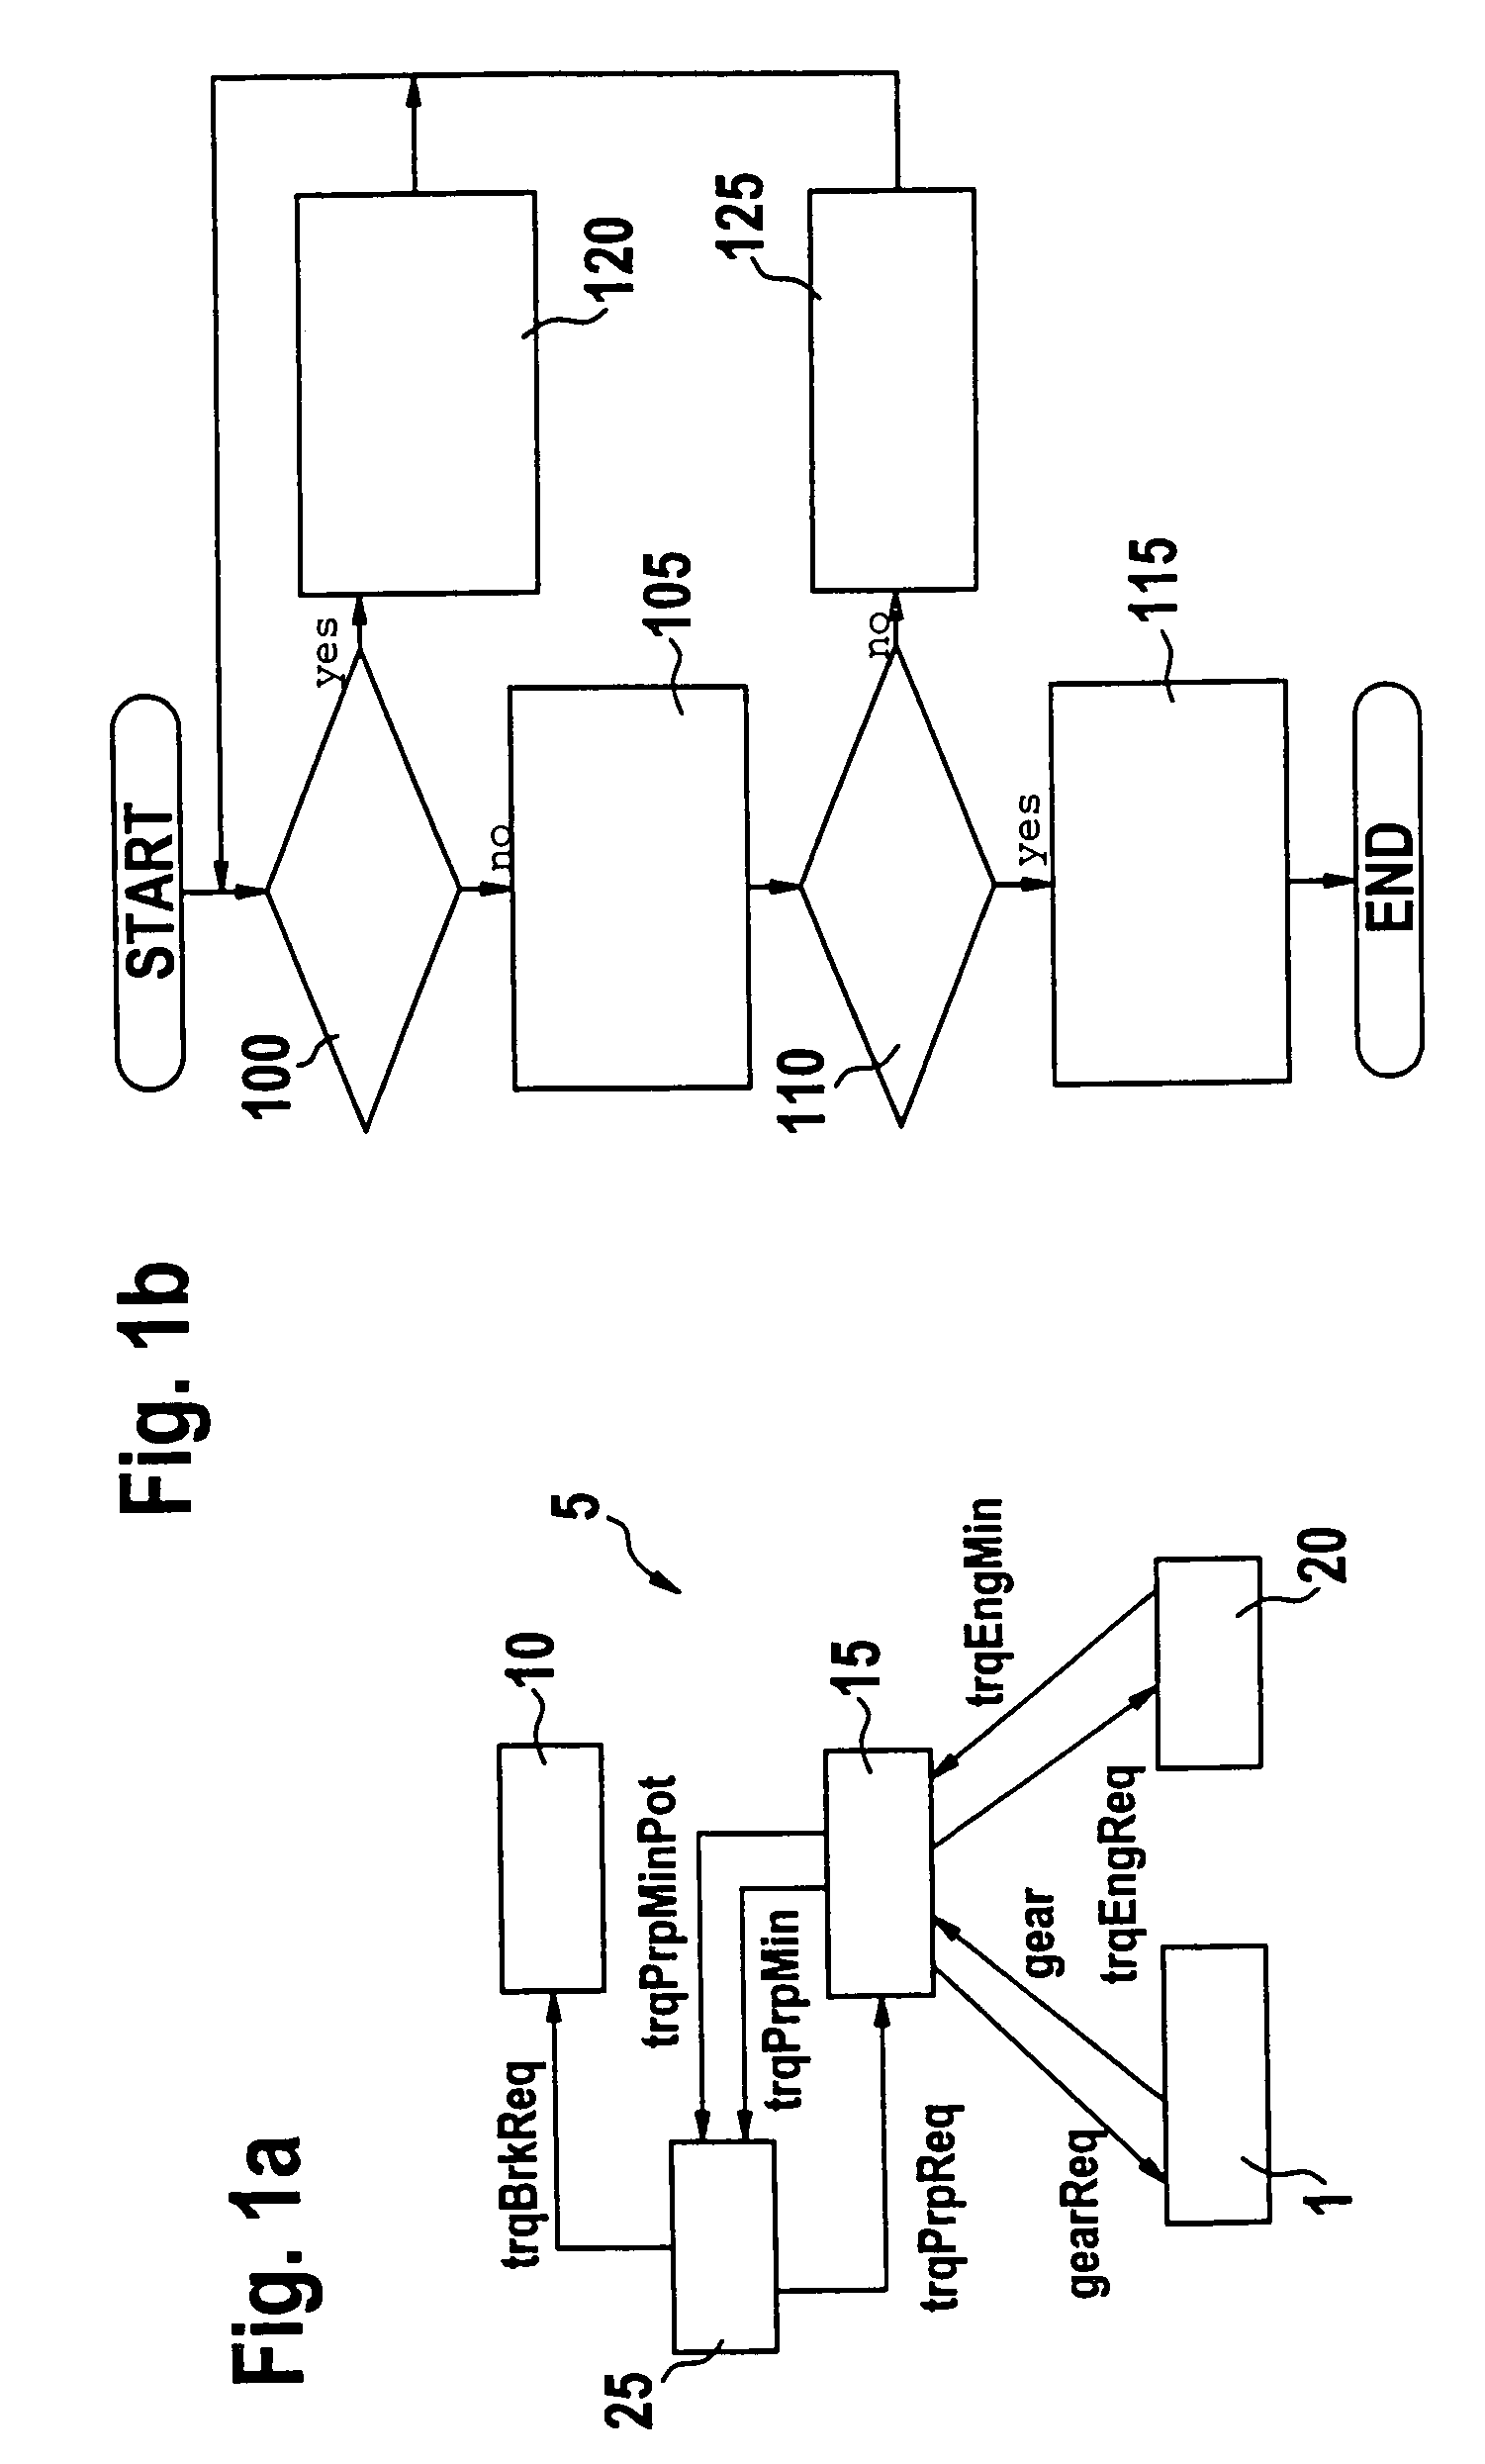 Method for controlling the speed of a vehicle